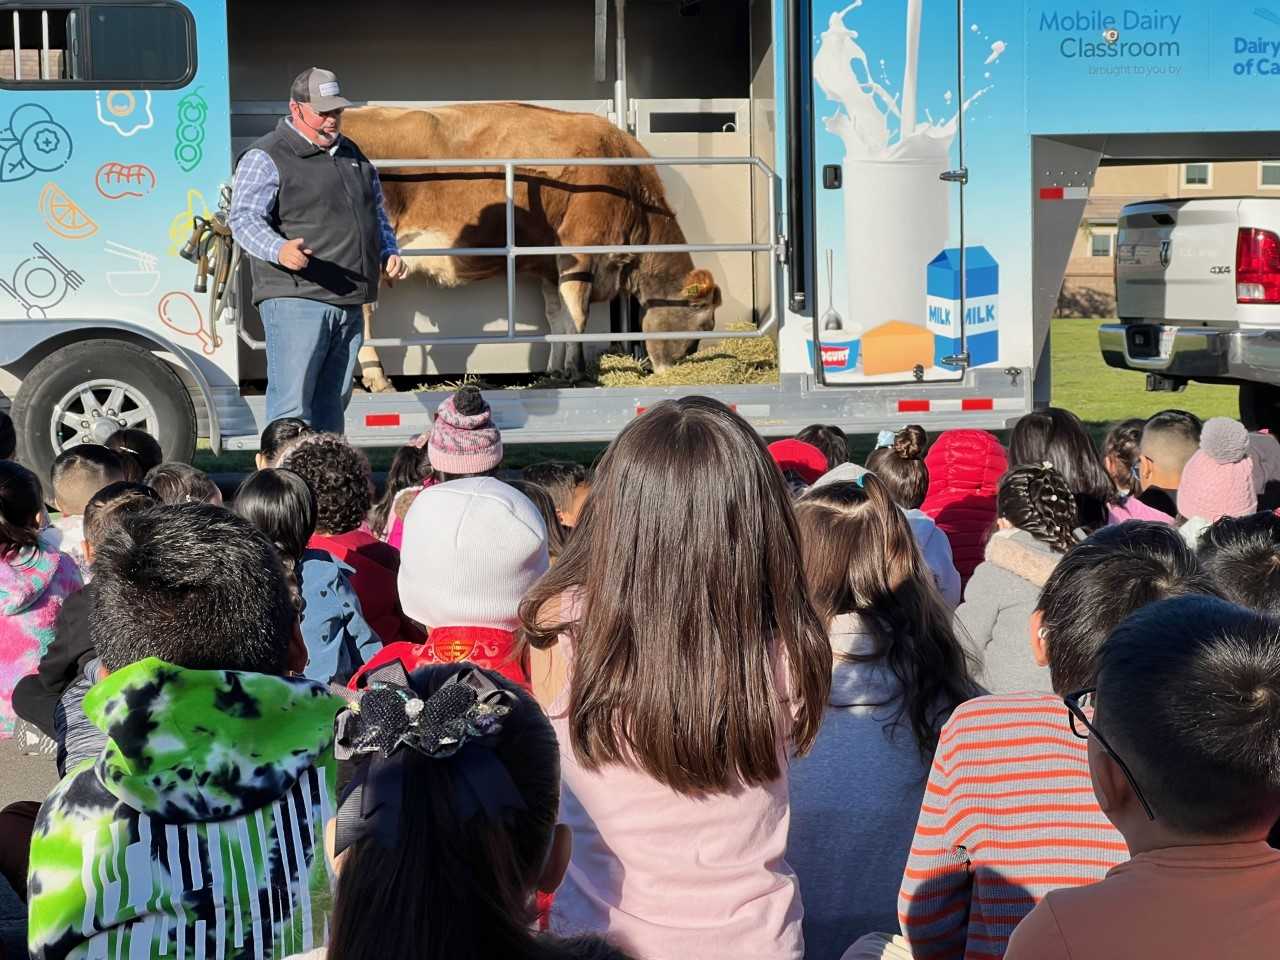 Students Enjoy the Mobile Dairy Assembly